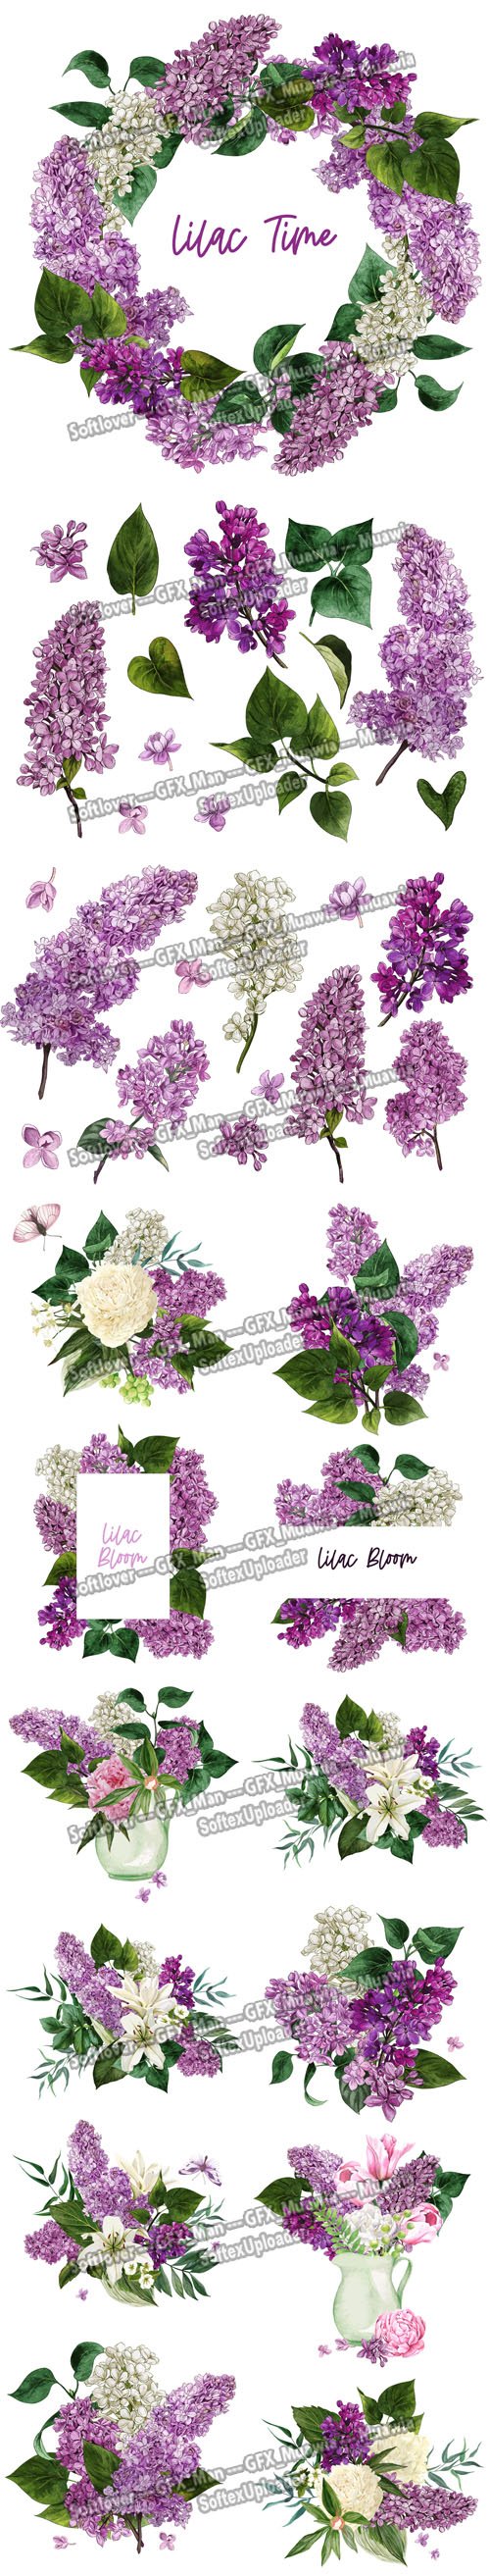 Spring Flowers Vector Templates Collection